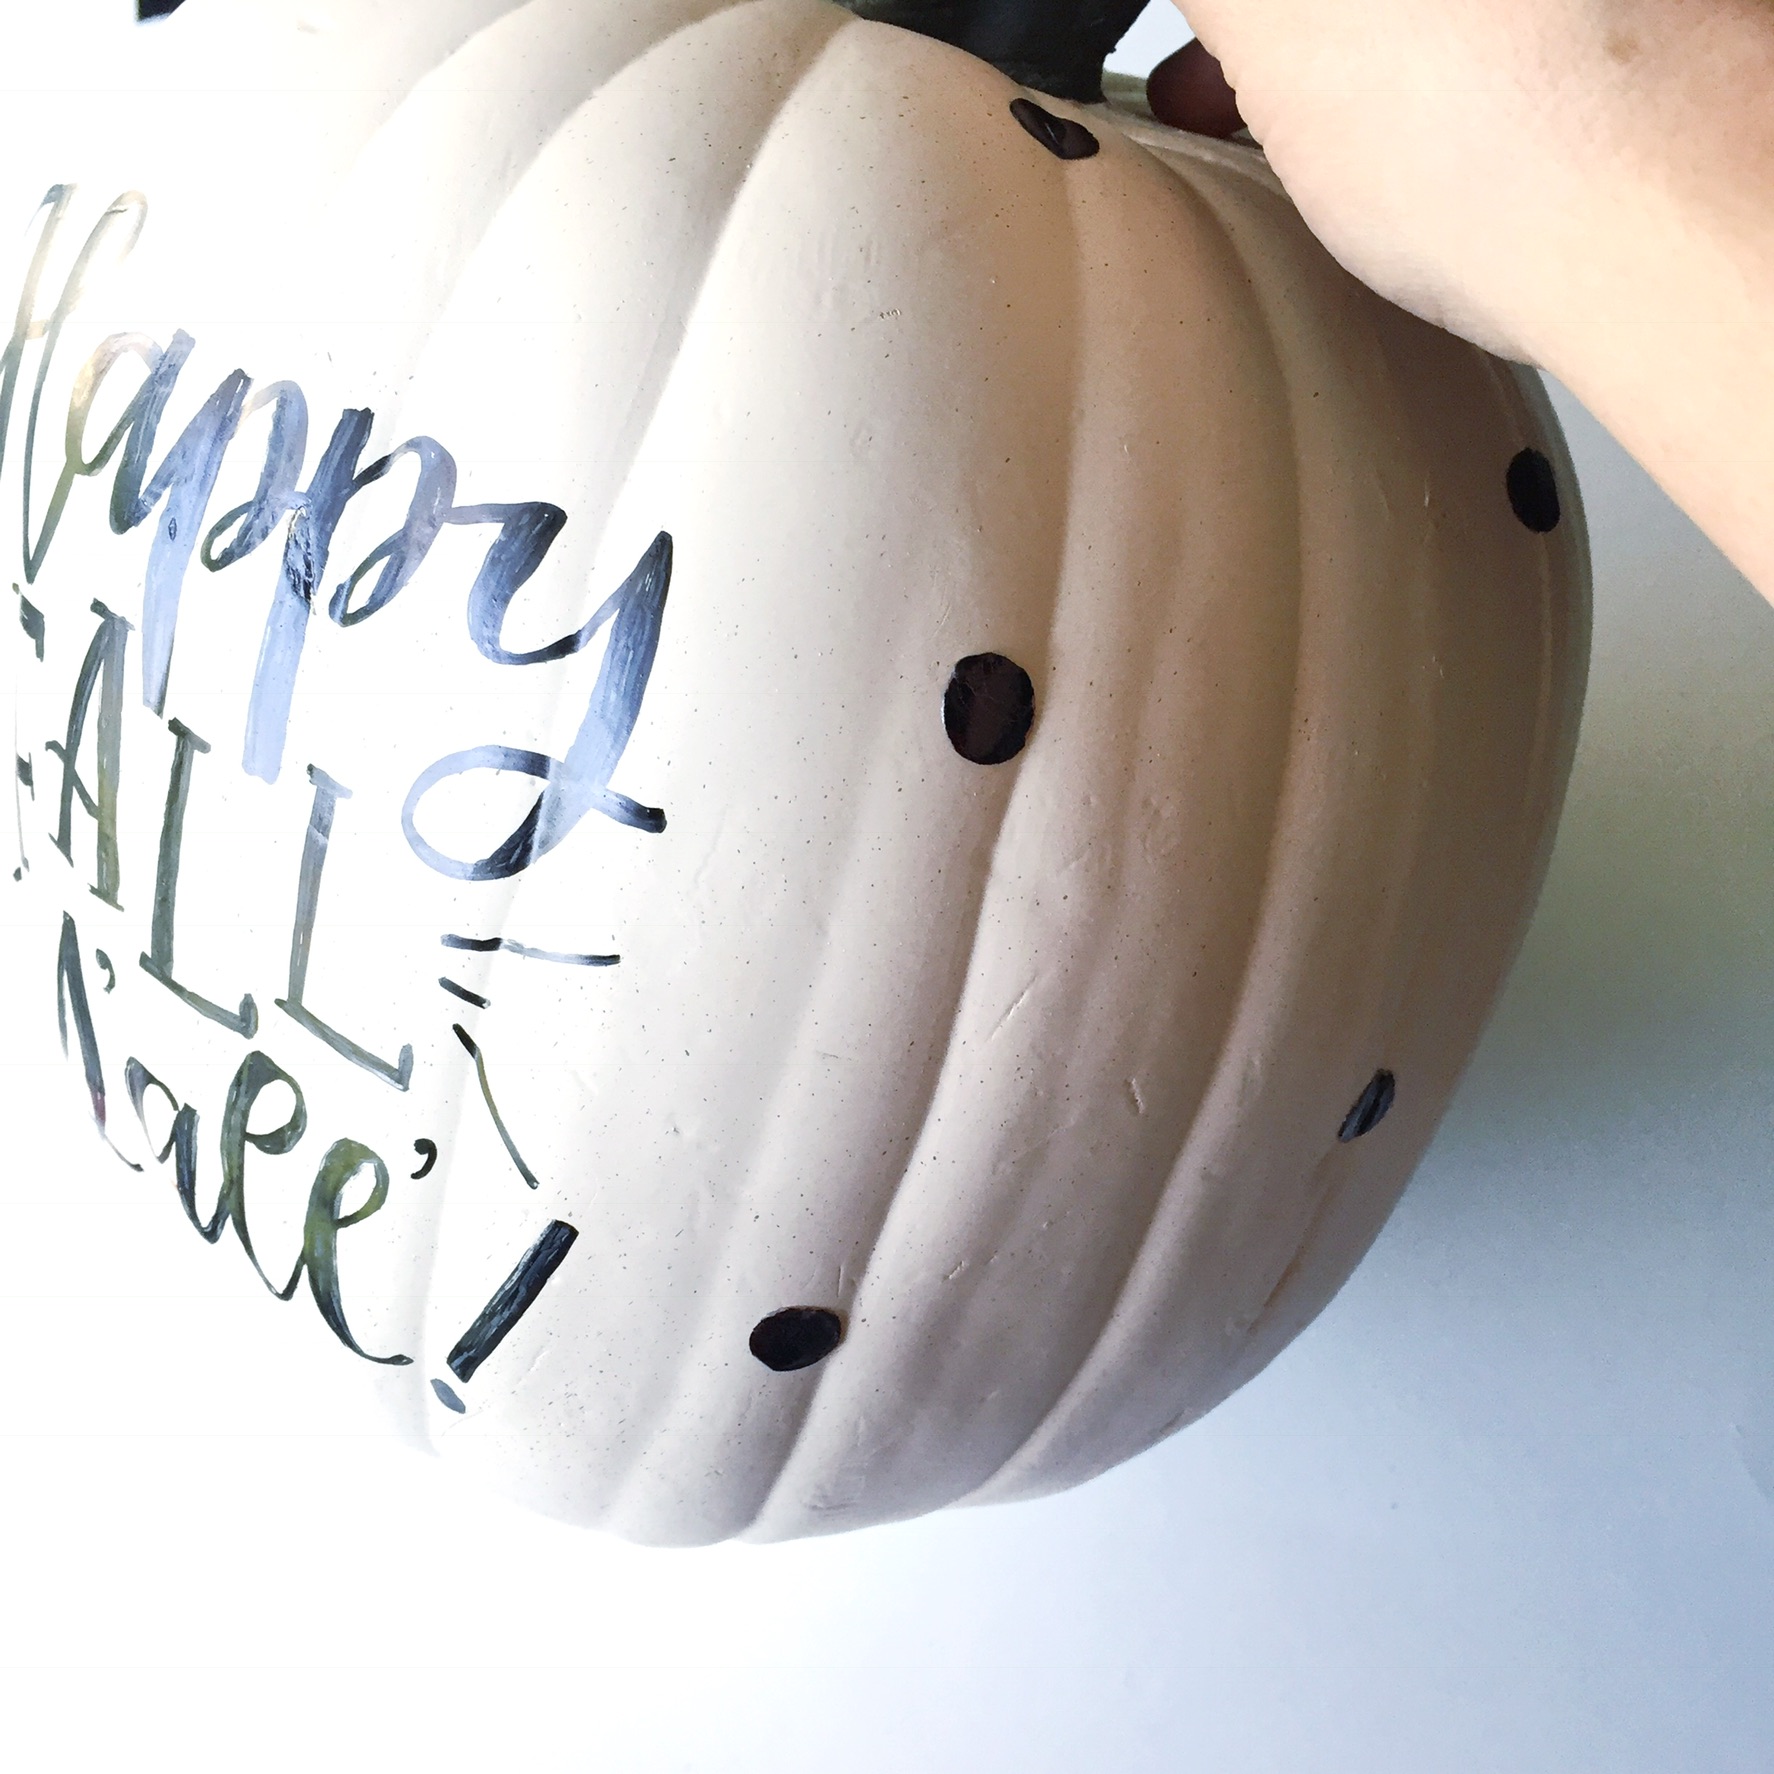 Lauren Fitzmaurice of Renmade Calligraphy shows you how to create a handlettered pumpkin that is covered in foil polkadots and burlap bow in this quick and easy 5 step tutorial using Tombow USA supplies. For more tips and tricks with letterIng and crafting goodness at renmadecalligraphy.com.